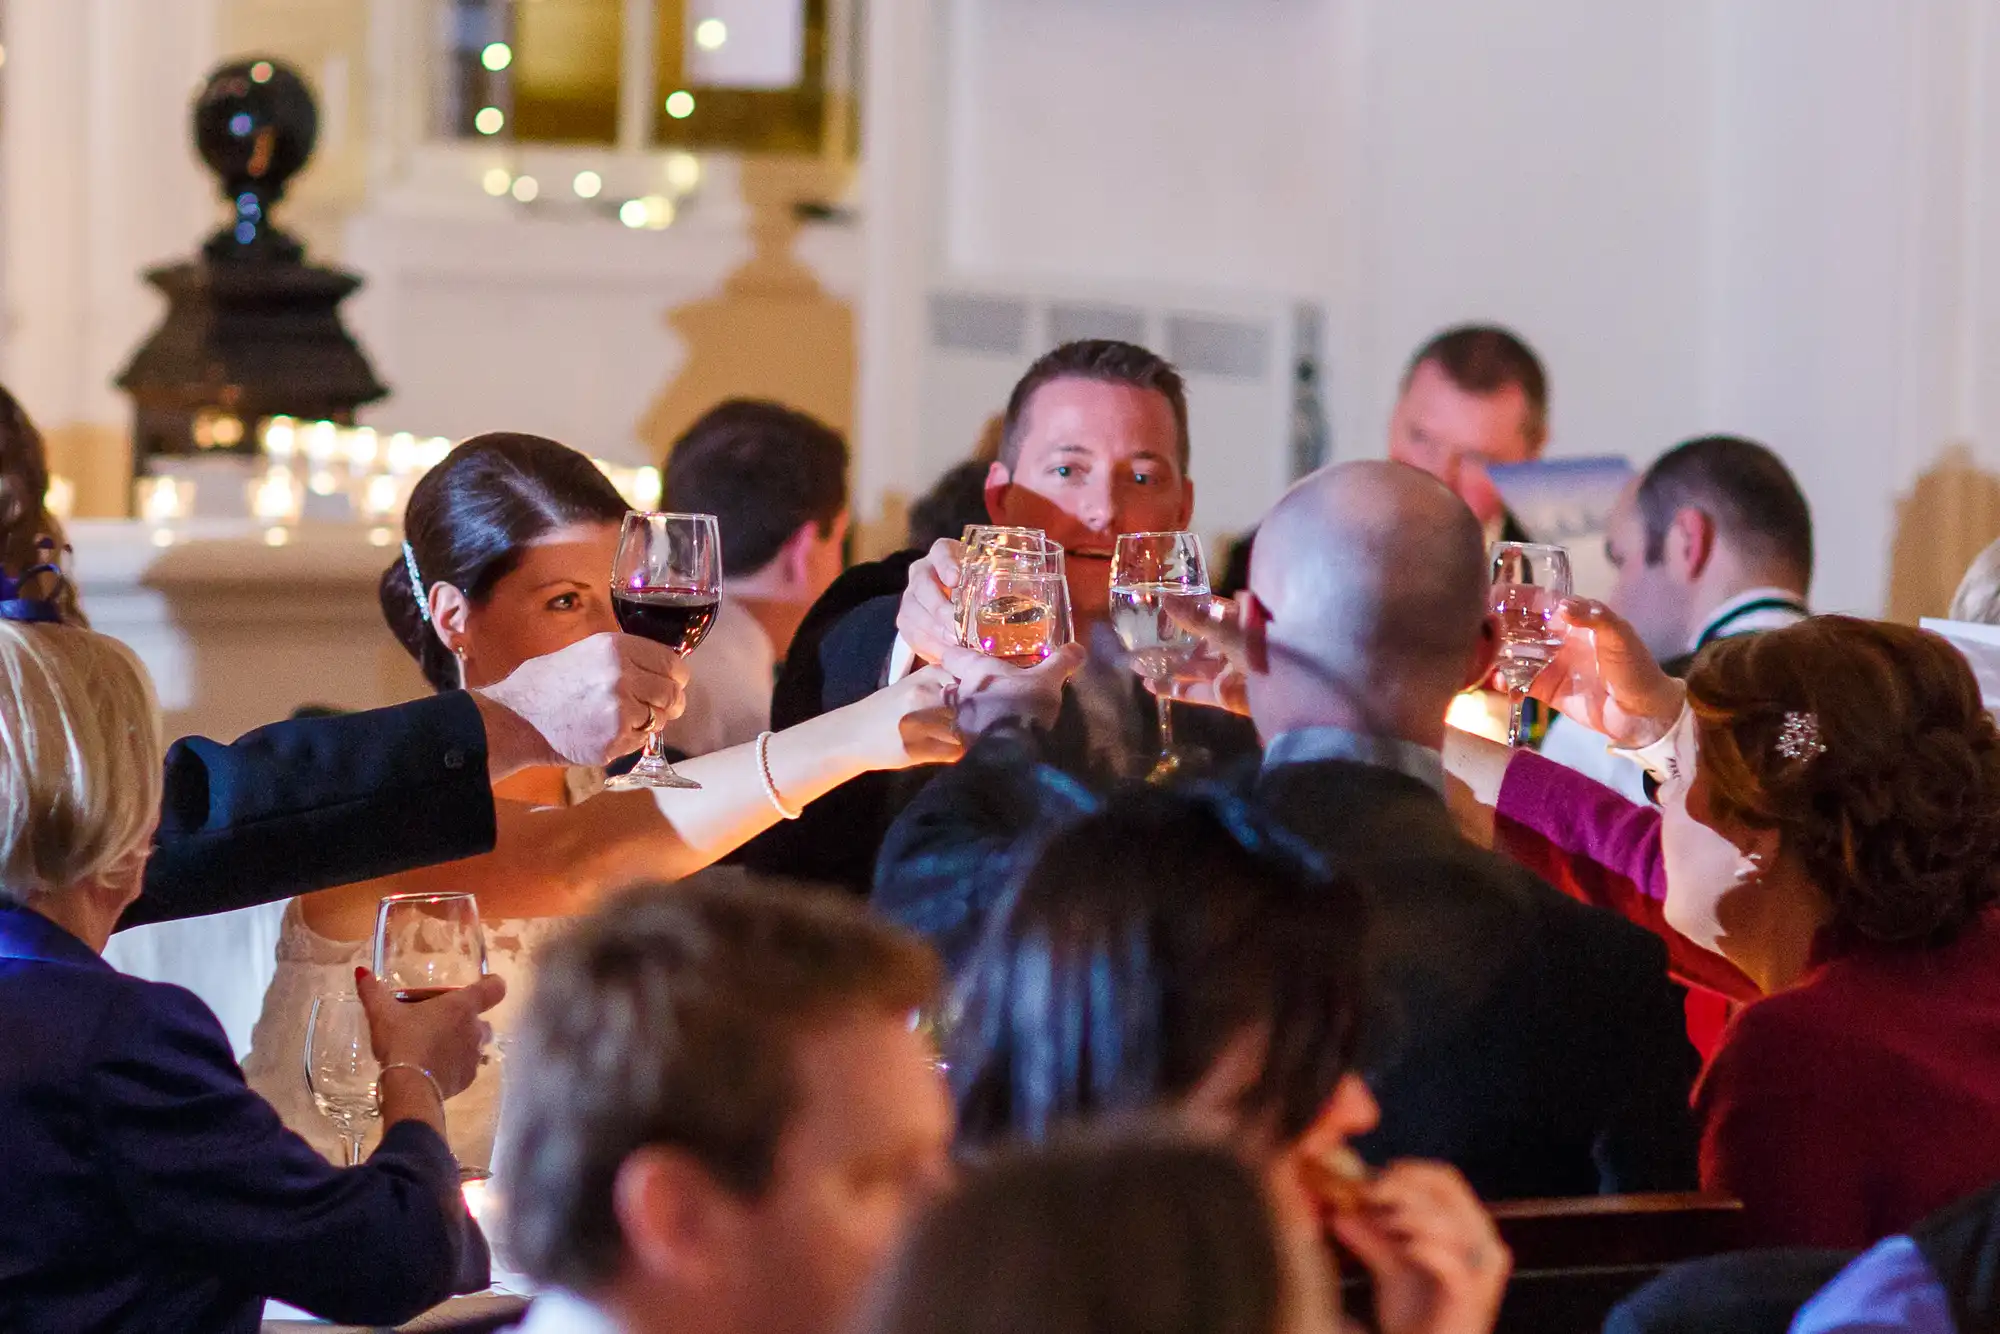 People at a formal event toasting with wine glasses in a warmly lit room.